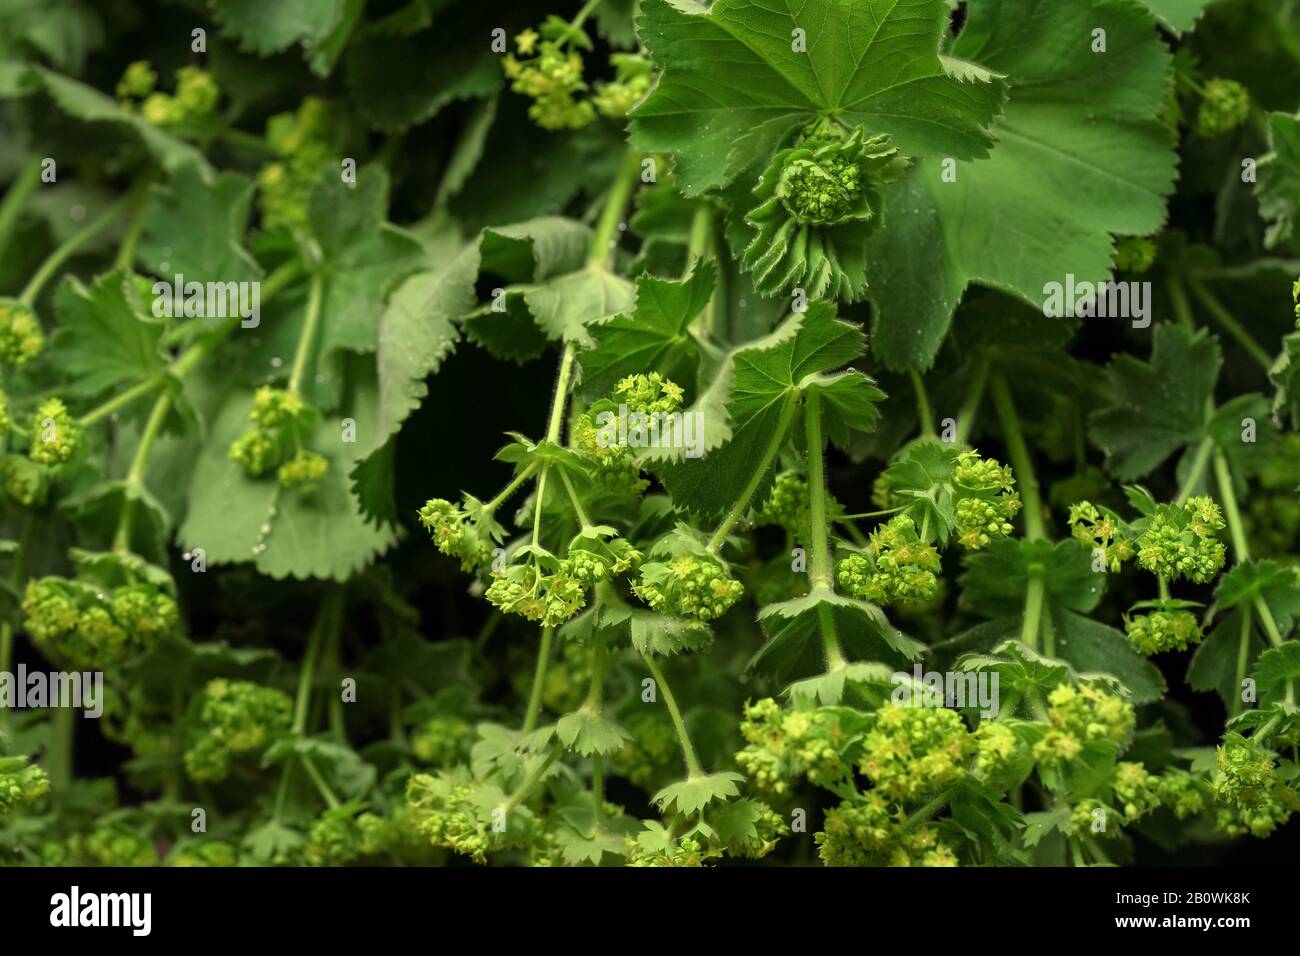 Common lady's mantle - Alchemilla vulgaris - leaves and flowers on display at herbs market Stock Photo